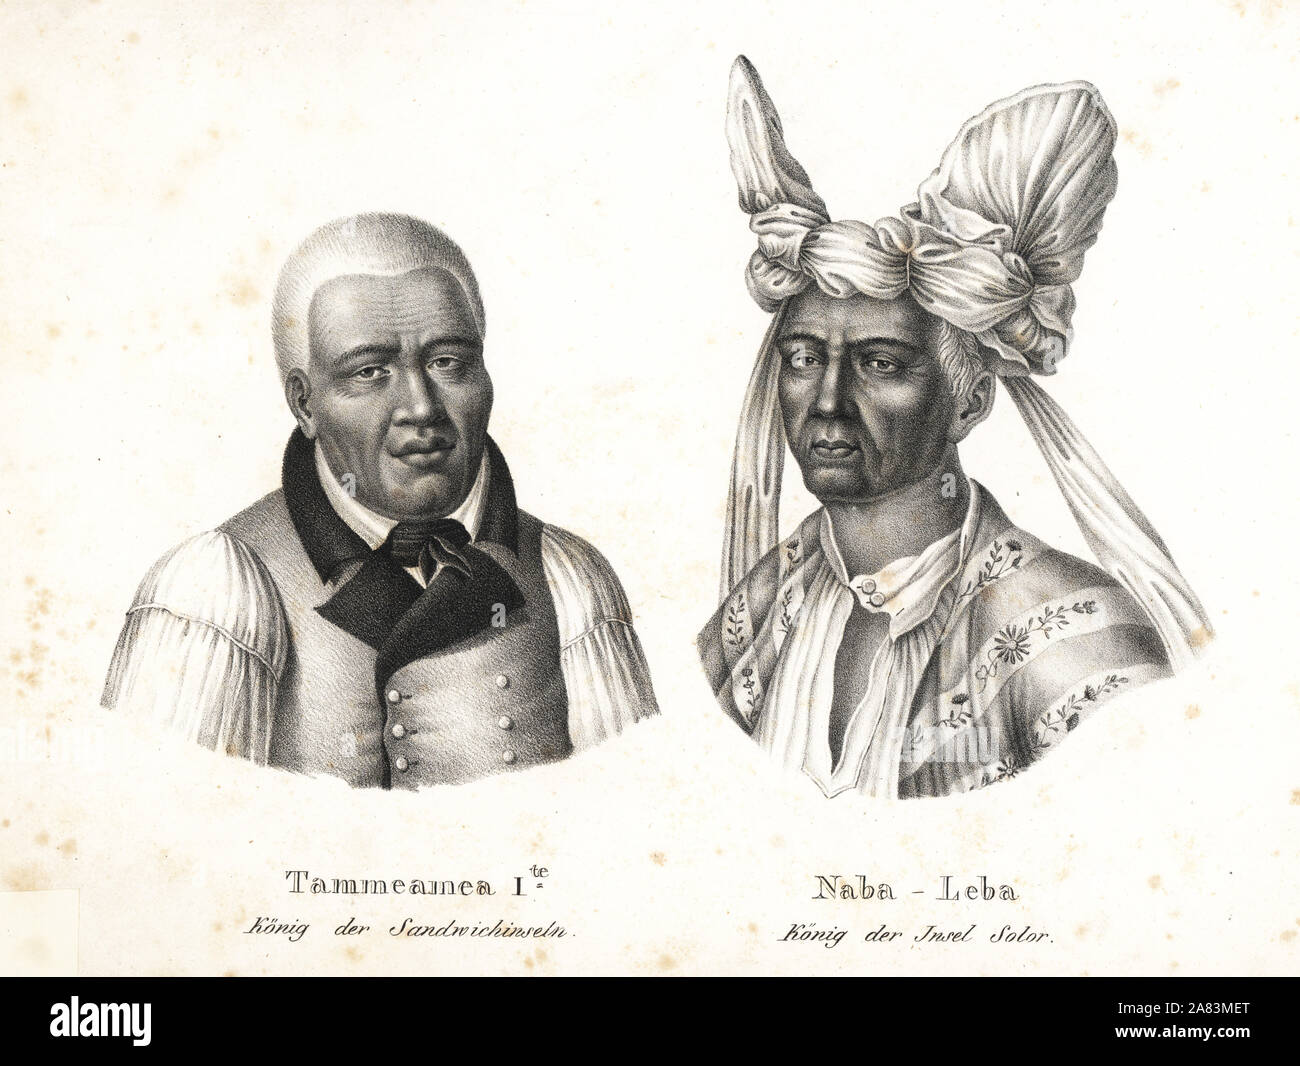 Kamehameha I, King of Hawaii (as Tammeamea I, King of the Sandwich Islands), and Naba Leba, Queen of Solor (Indonesia). Lithograph by Karl Joseph Brodtmann from Heinrich Rudolf Schinz's Illustrated Natural History of Men and Animals, 1836. Stock Photo